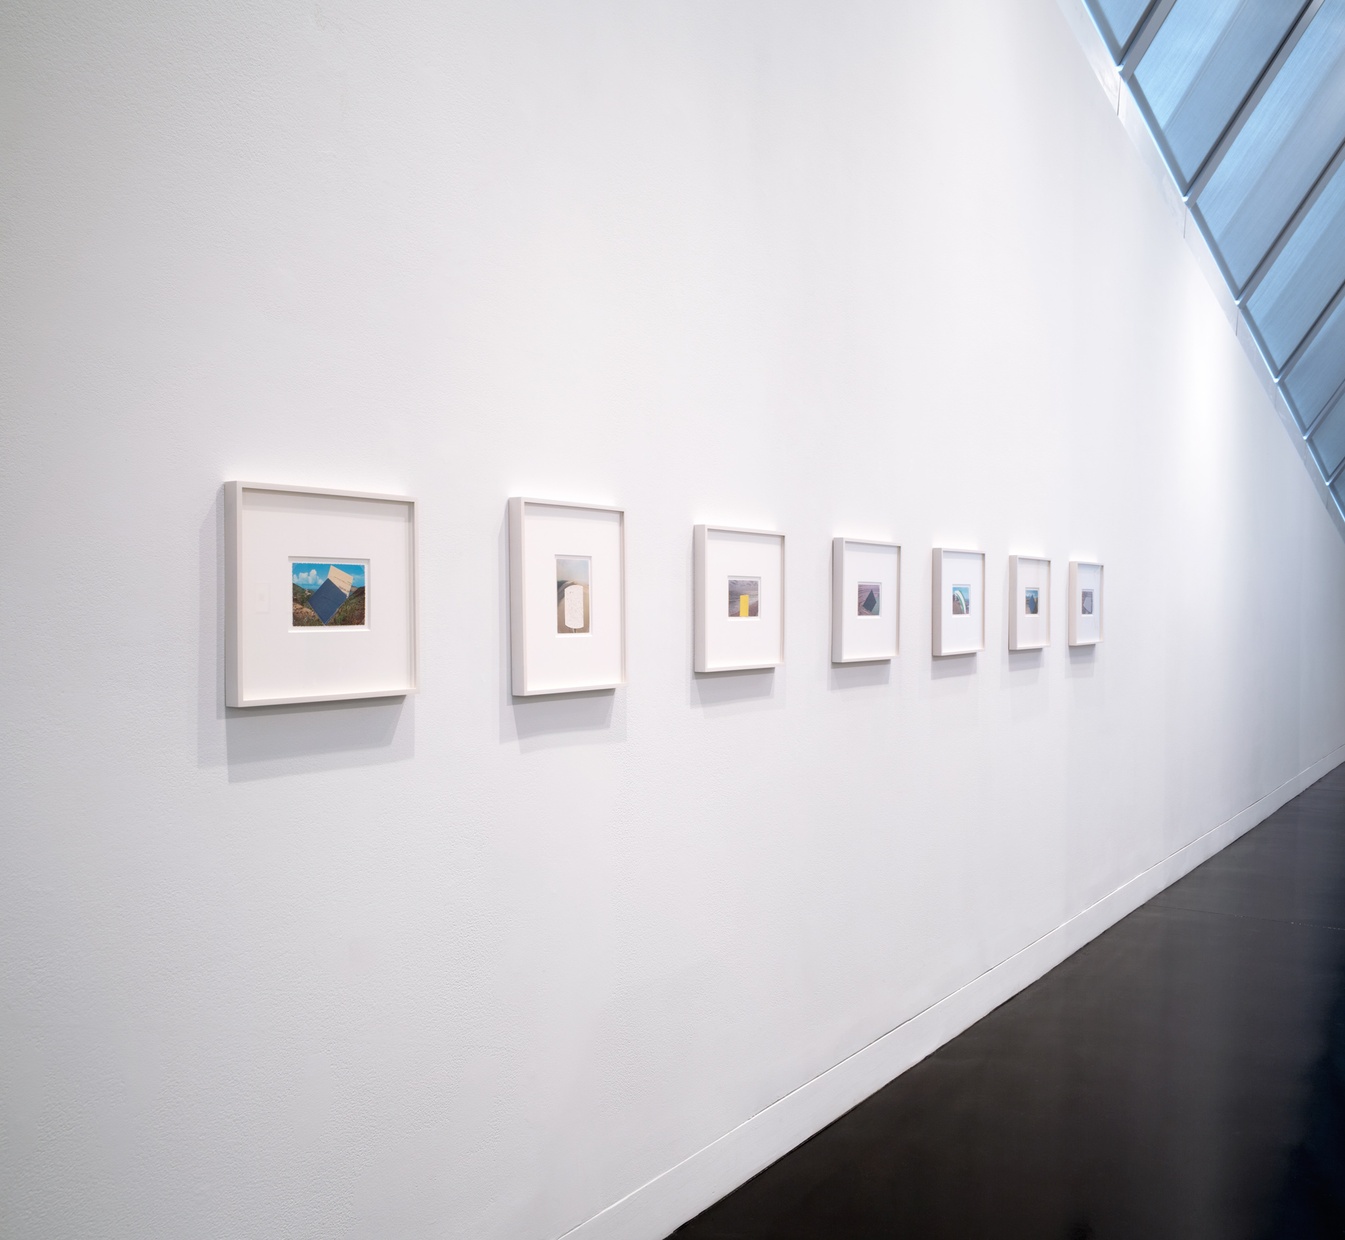 Seen from an angle, a row of framed postcard collages hangs on a white wall.